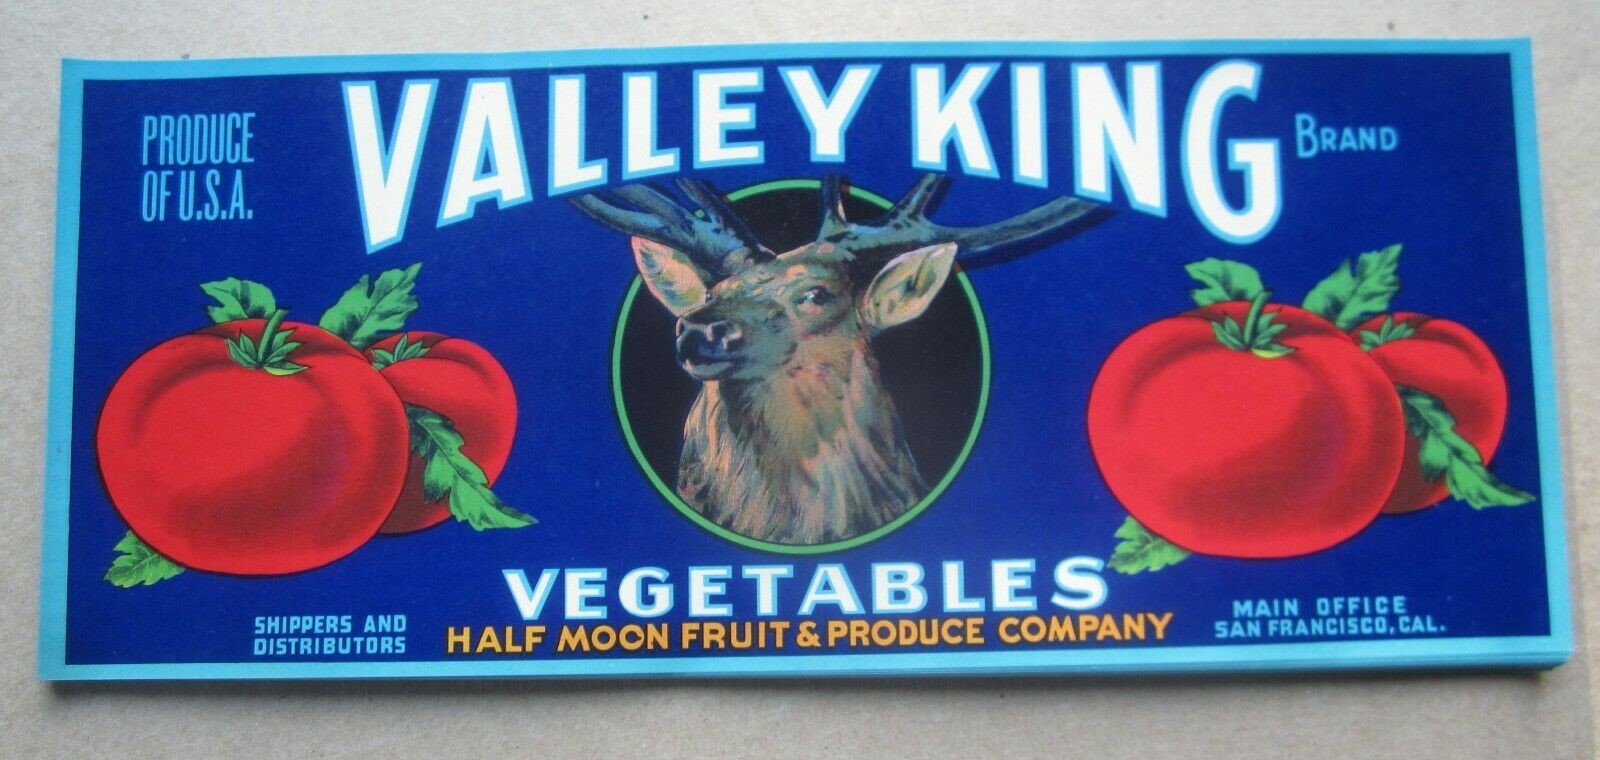  Lot of 50 Old Vintage VALLEY KING Tomato LABEL...